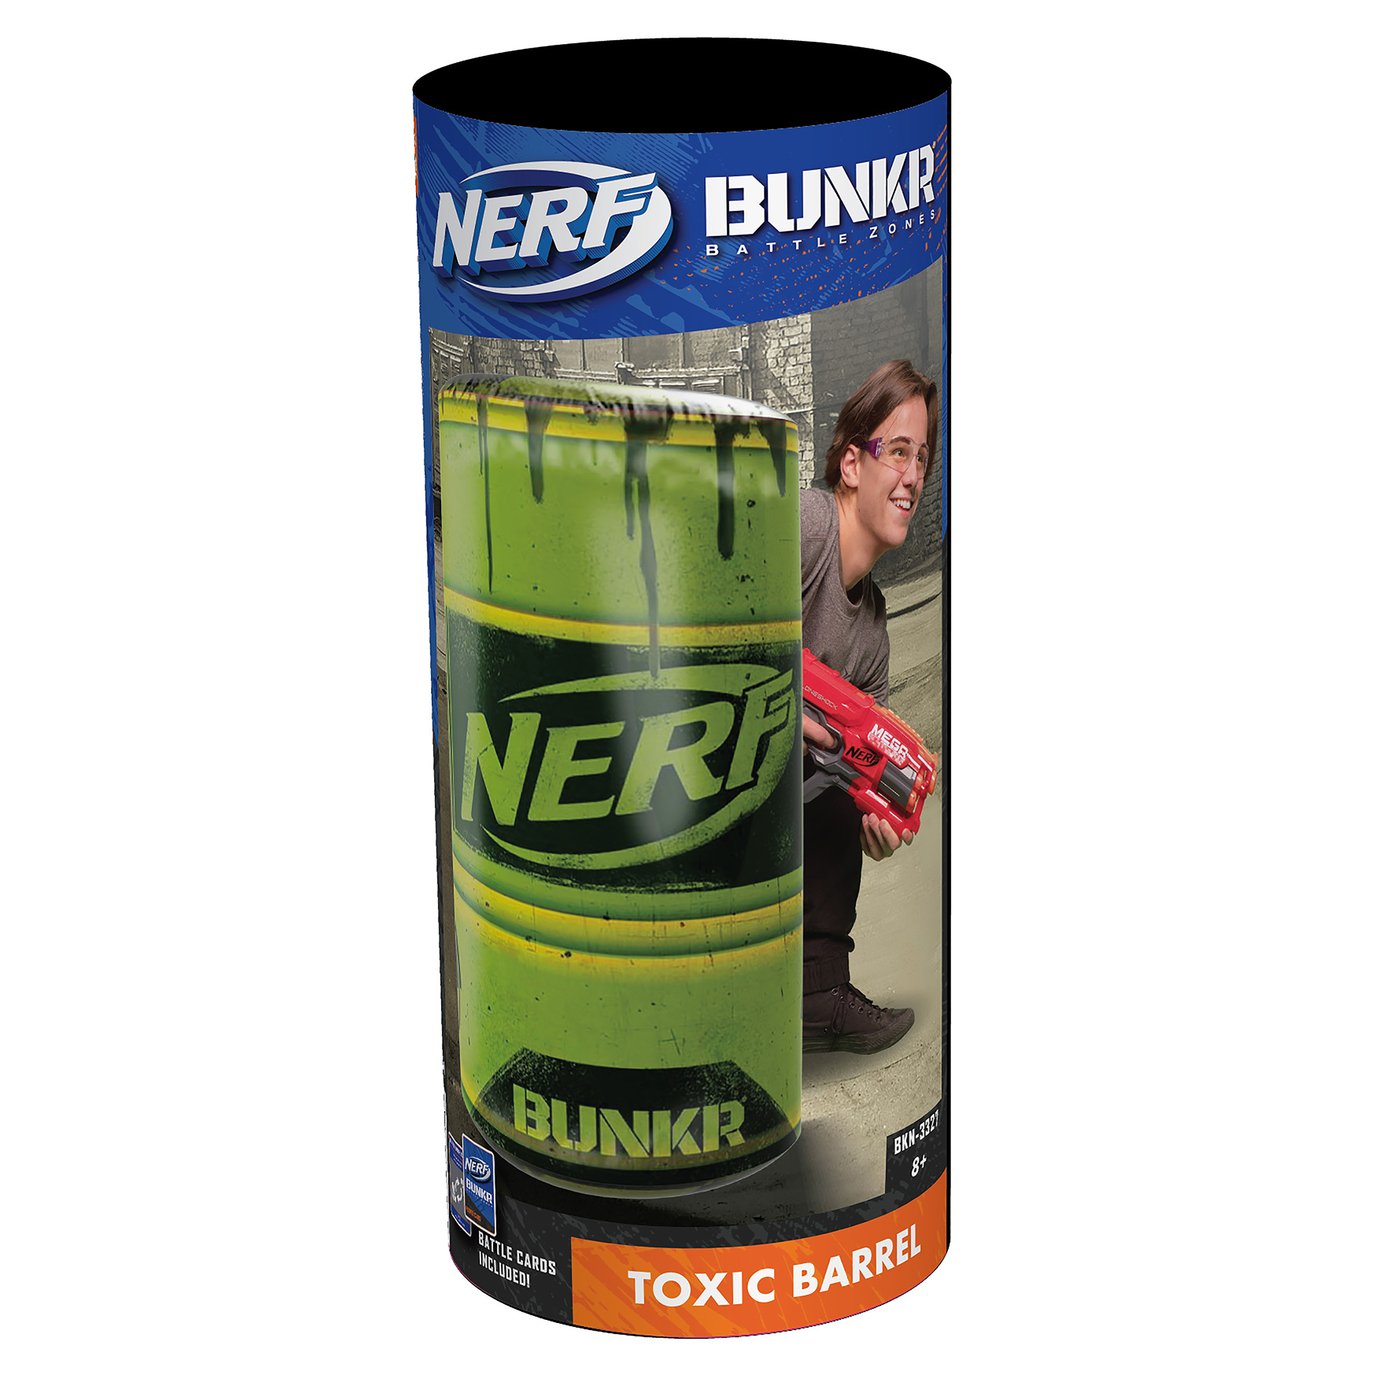 Nerf BUNKR Take Cover Barrel Review